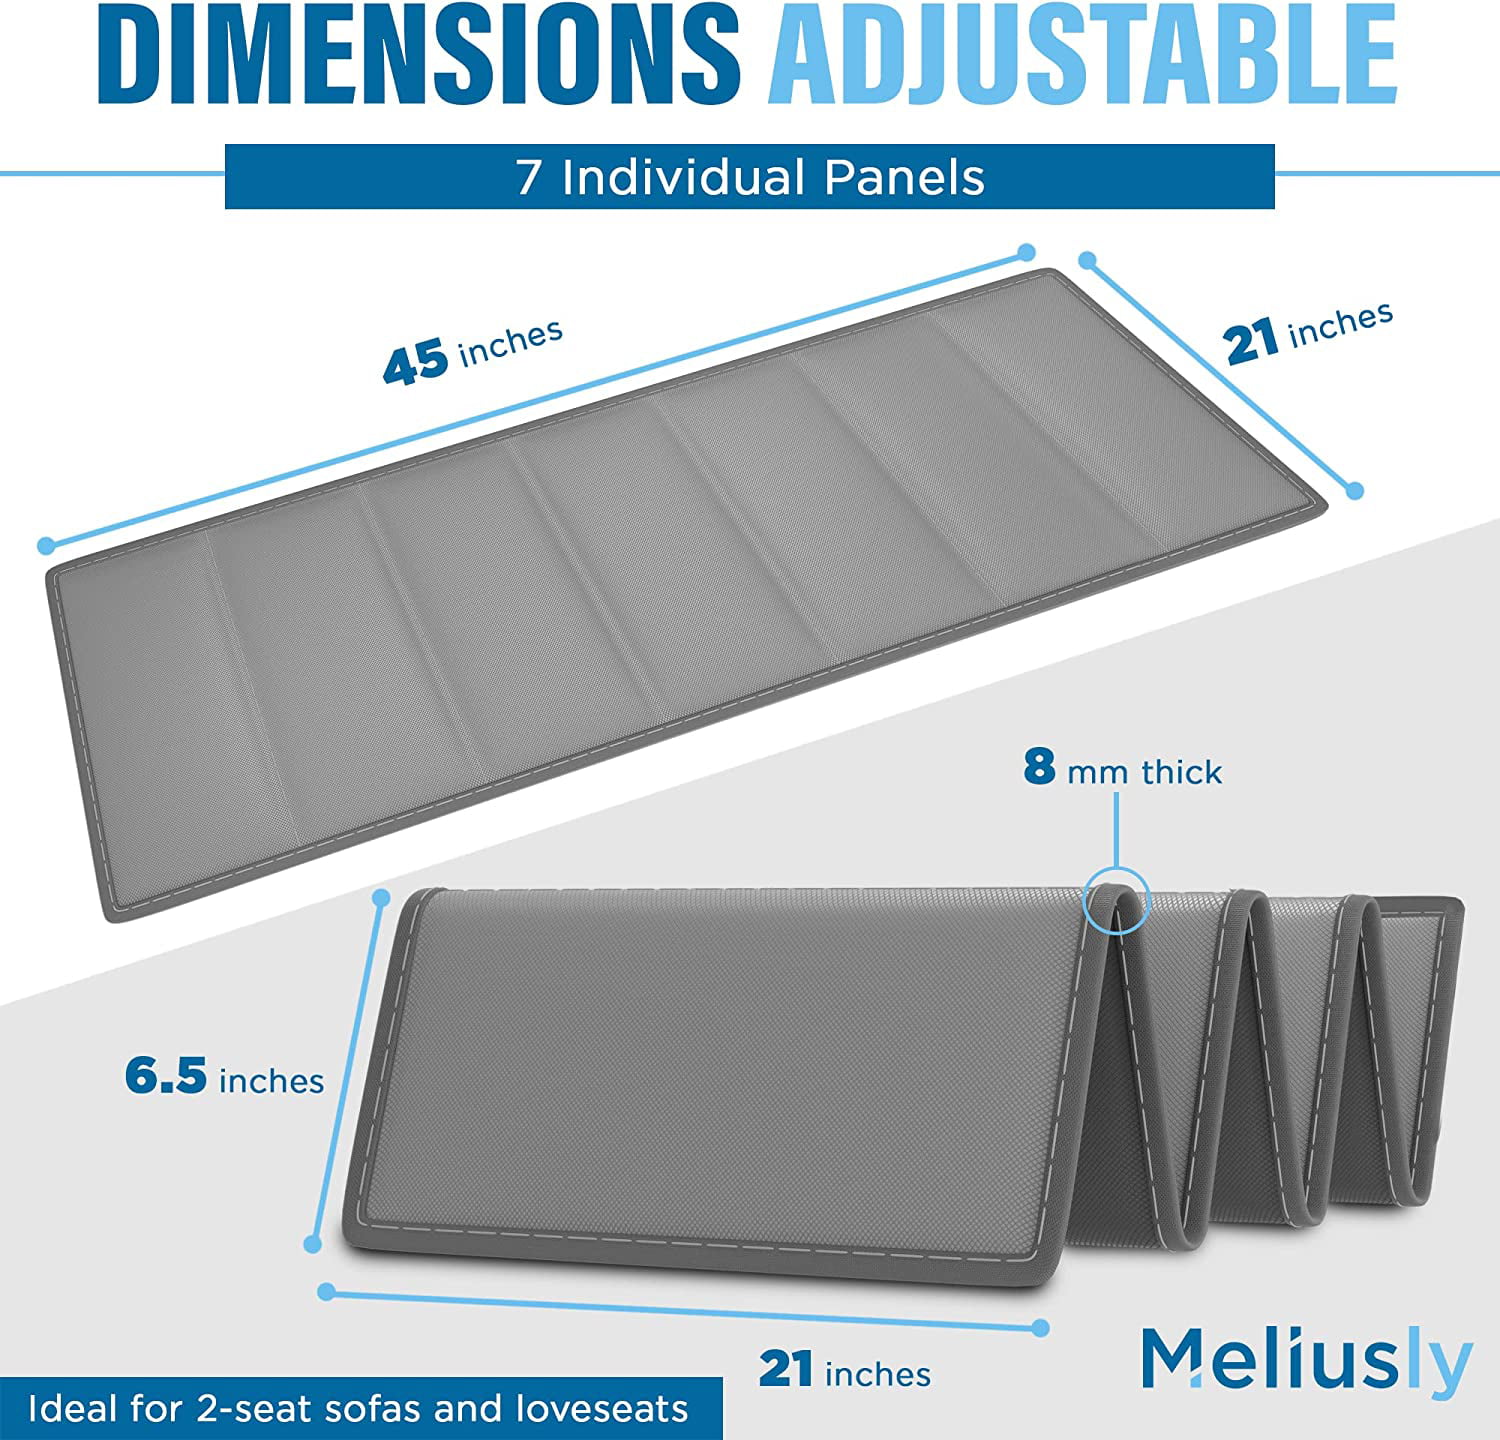 Meliusly® Couch Supports for Sagging Cushions (21x72) Sofa Cushion Support  Board for Sagging Seat, Under Couch Cushions Support Boards, Couch Cushion